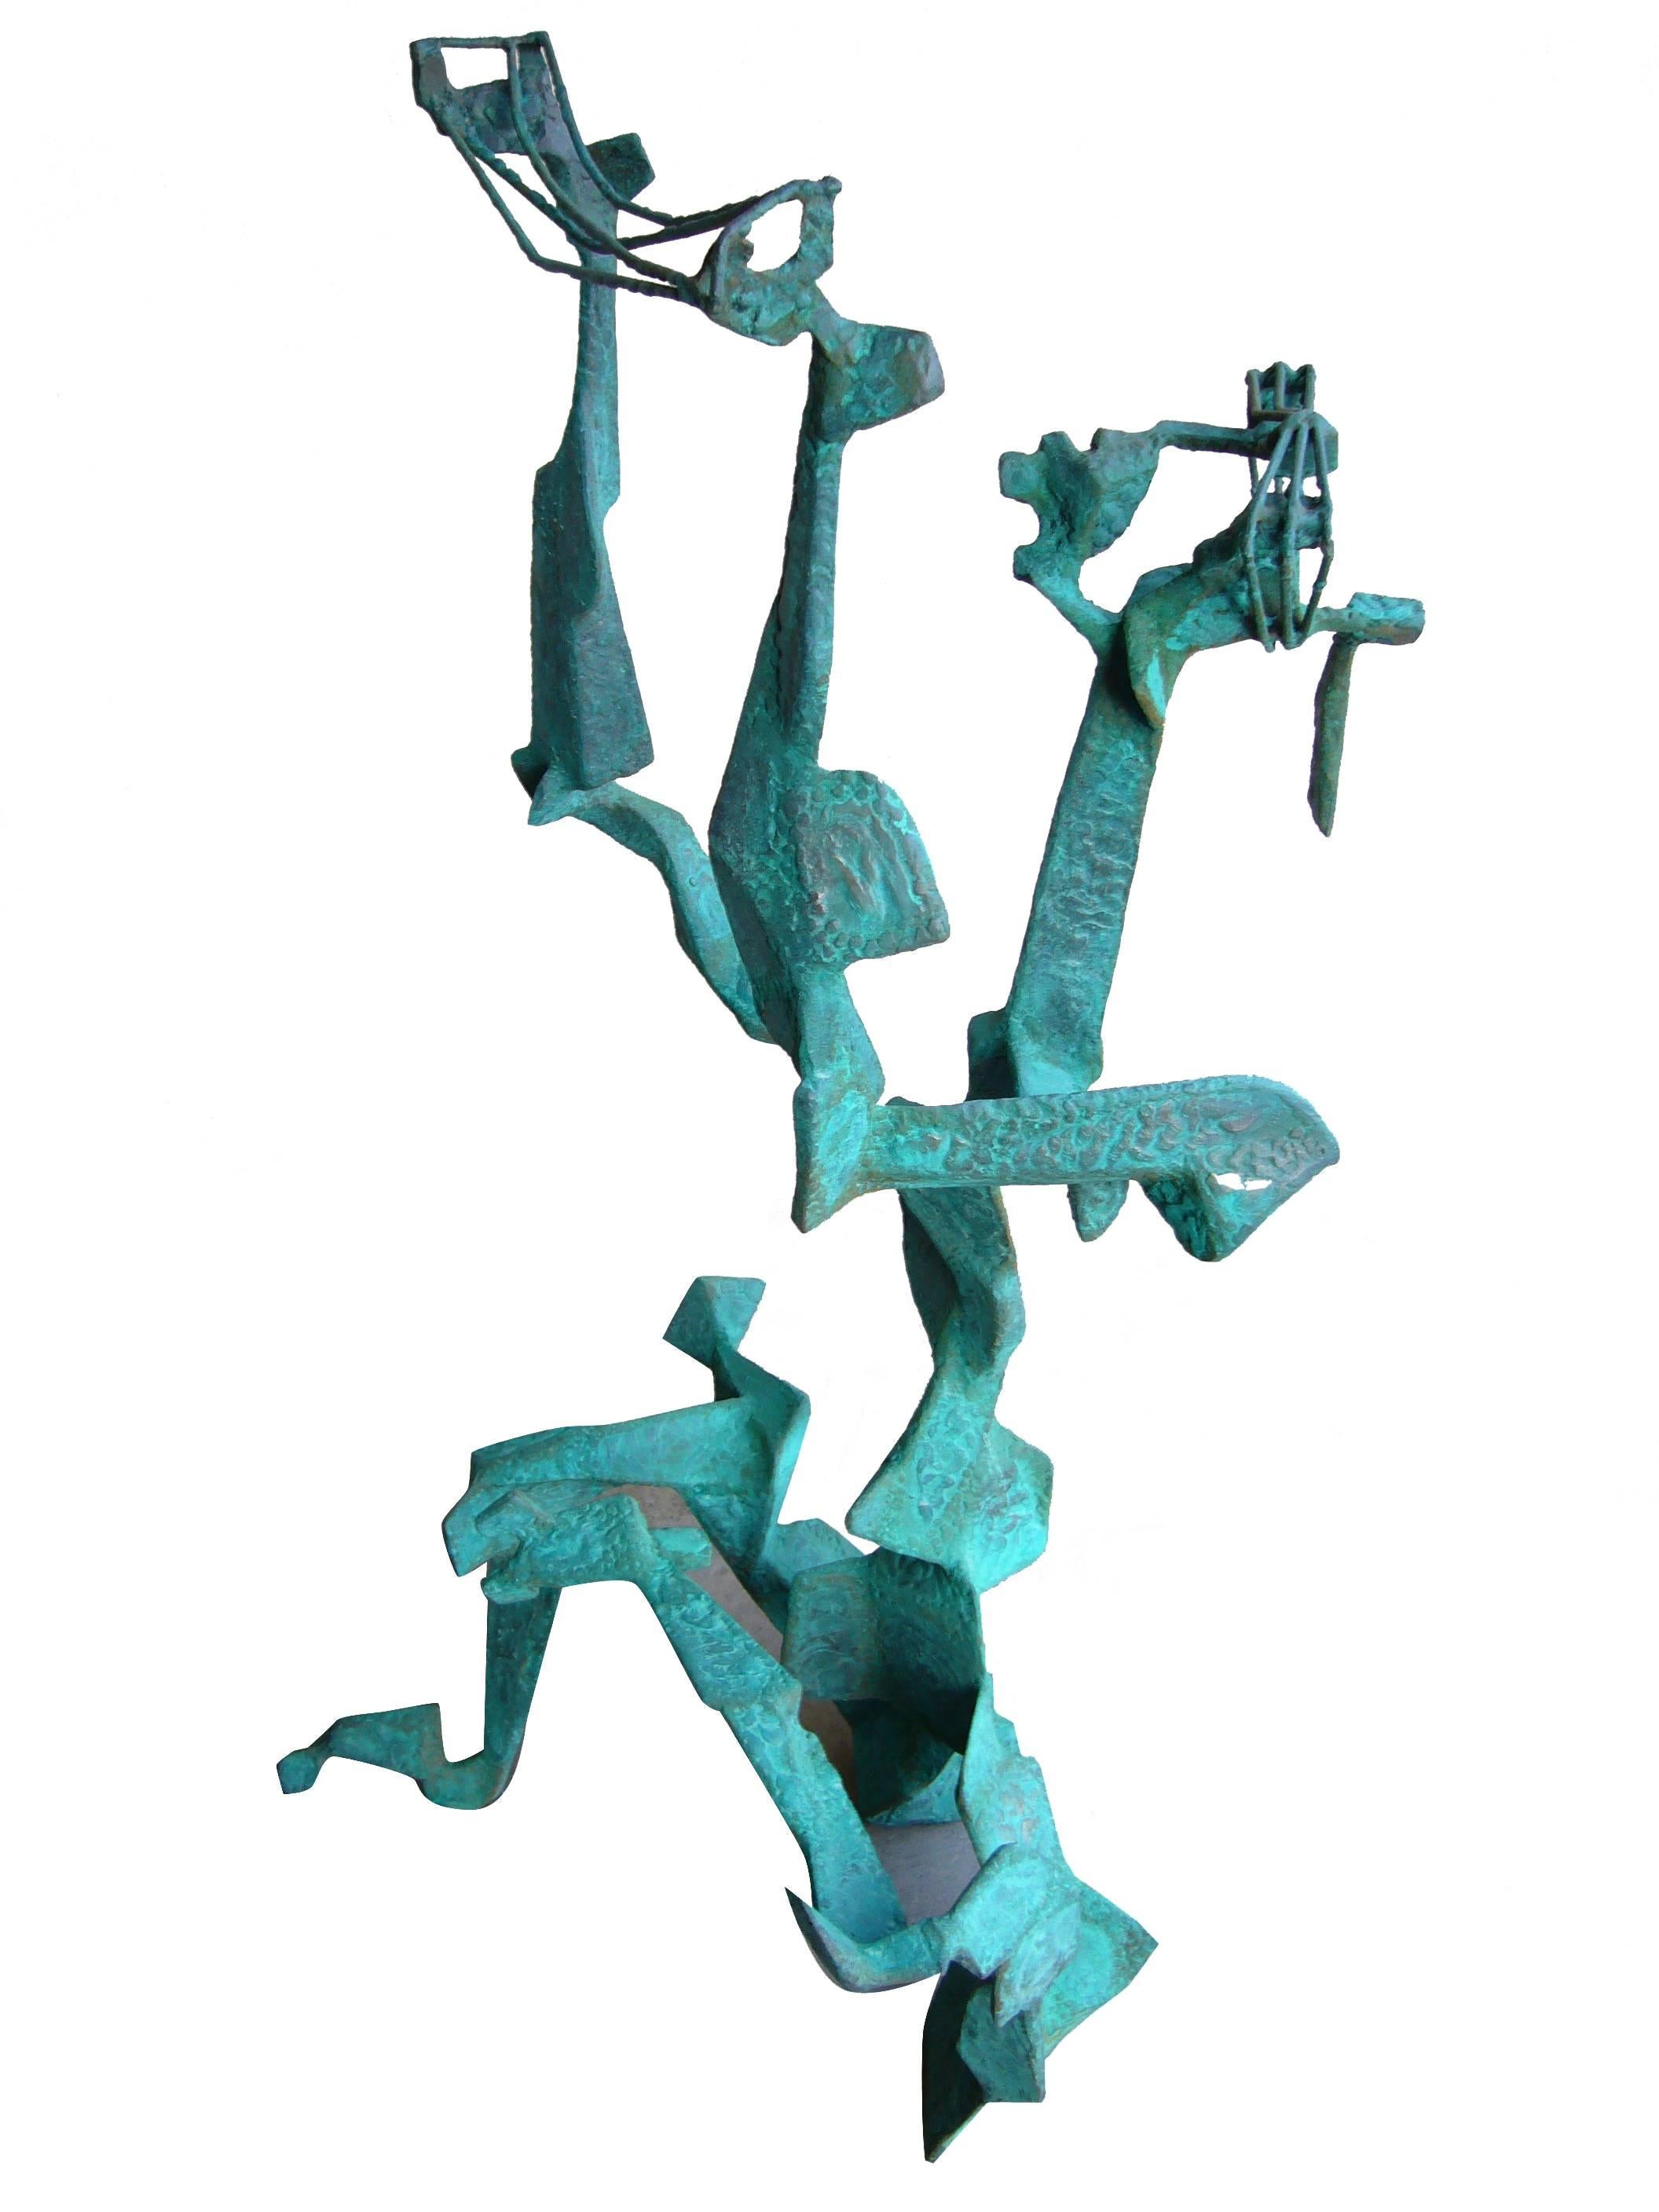 Large-scale abstract modern sculpture made of patinated metal, circa 1950s. Sculpture depicts an adult figure playing the child's string game of Cat's Cradle, blindfolded. Sculpture measures 47